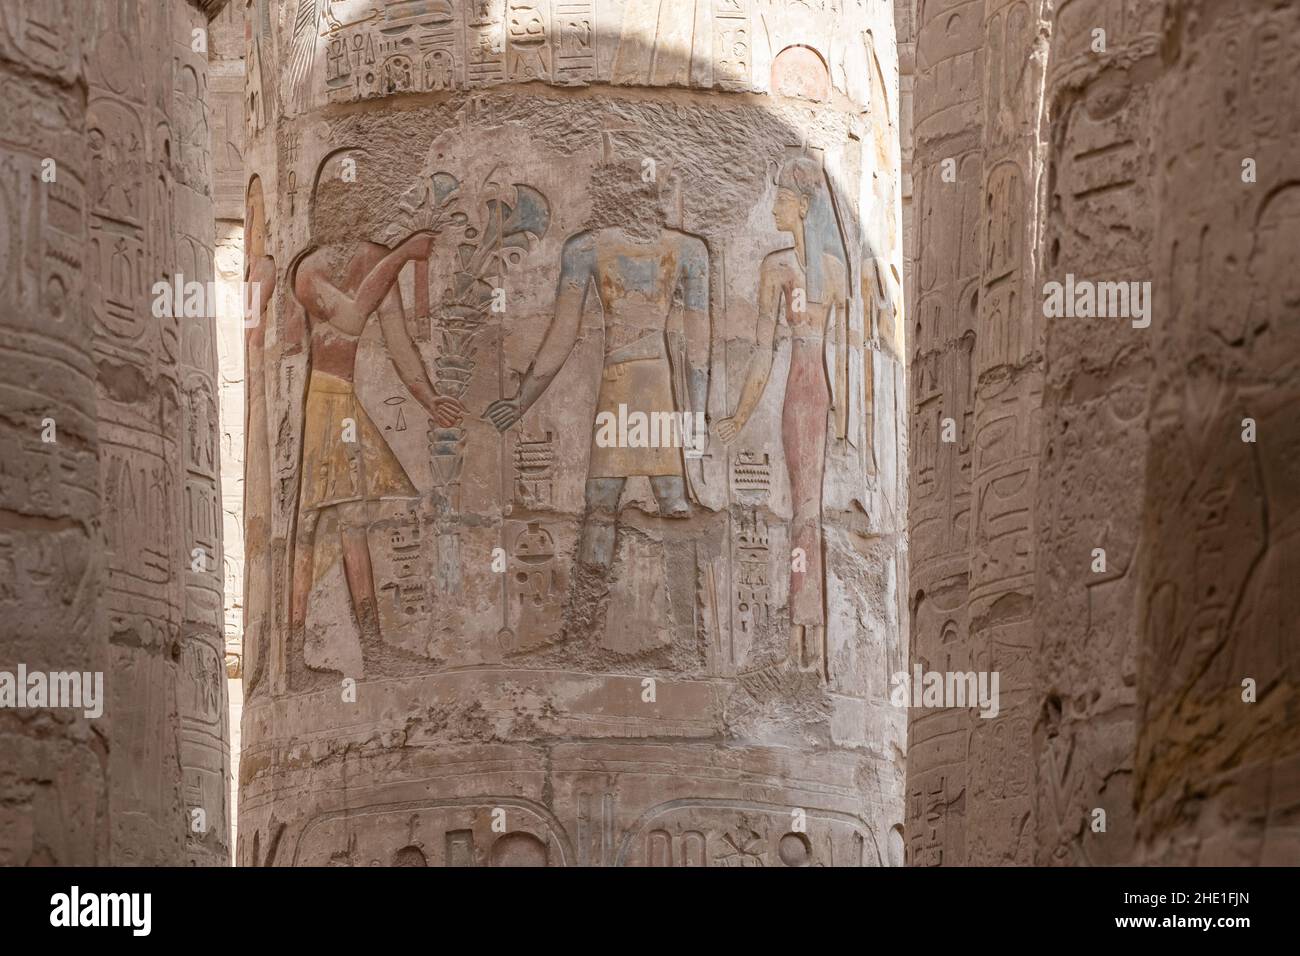 Figures in the Hypostyle hall at Karnak temple, the relief sculptures are well preserved even retaining paint although the faces were chipped off. Stock Photo